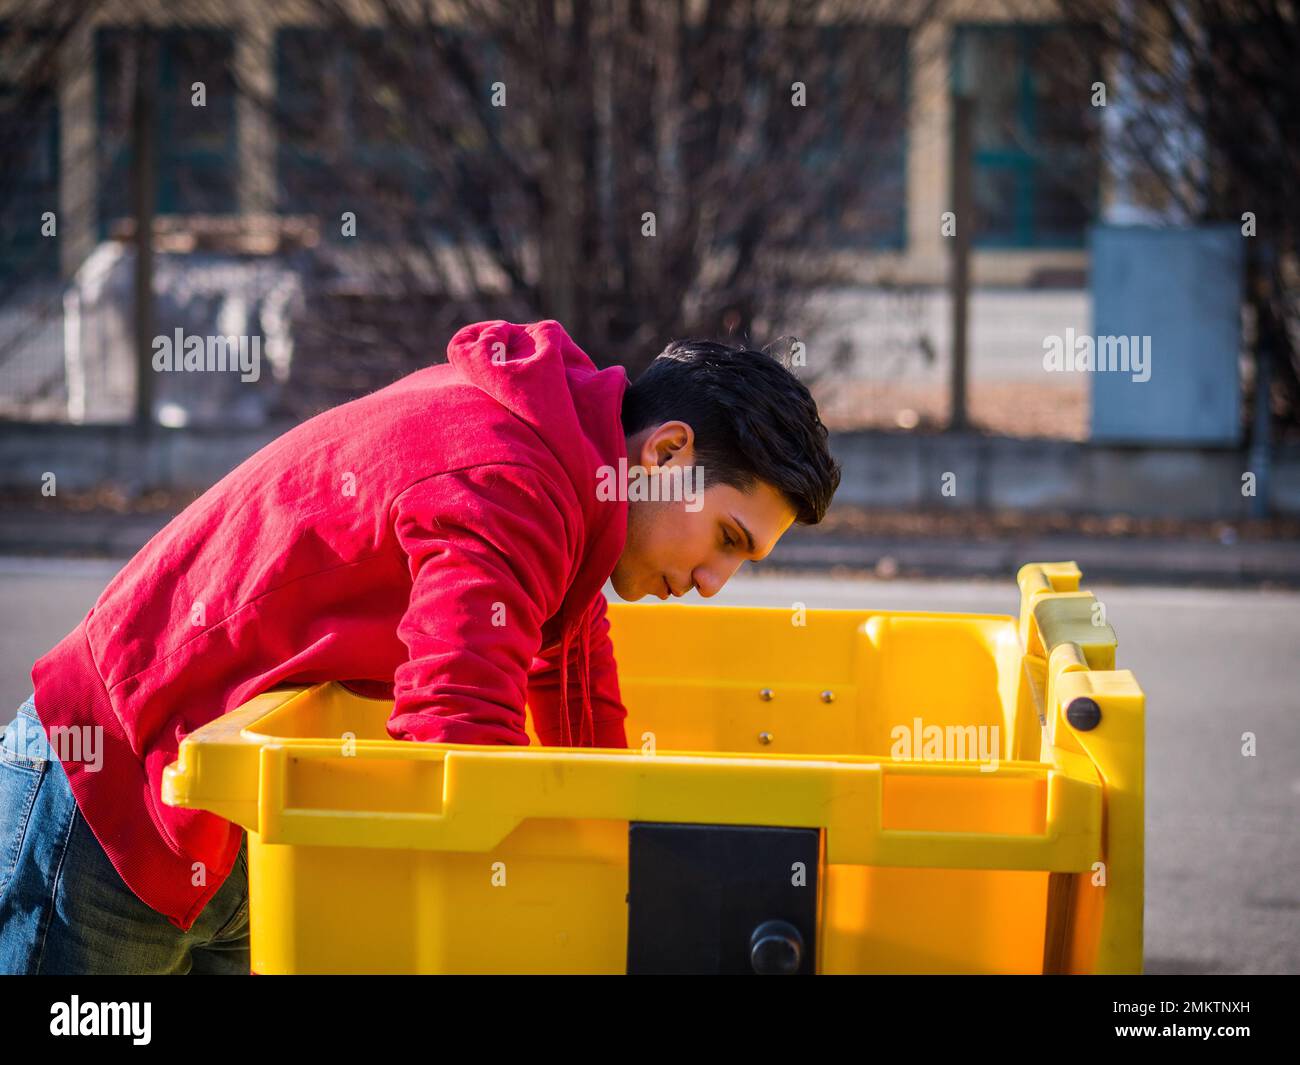 Attractive young man putting out rubbish standing Stock Photo